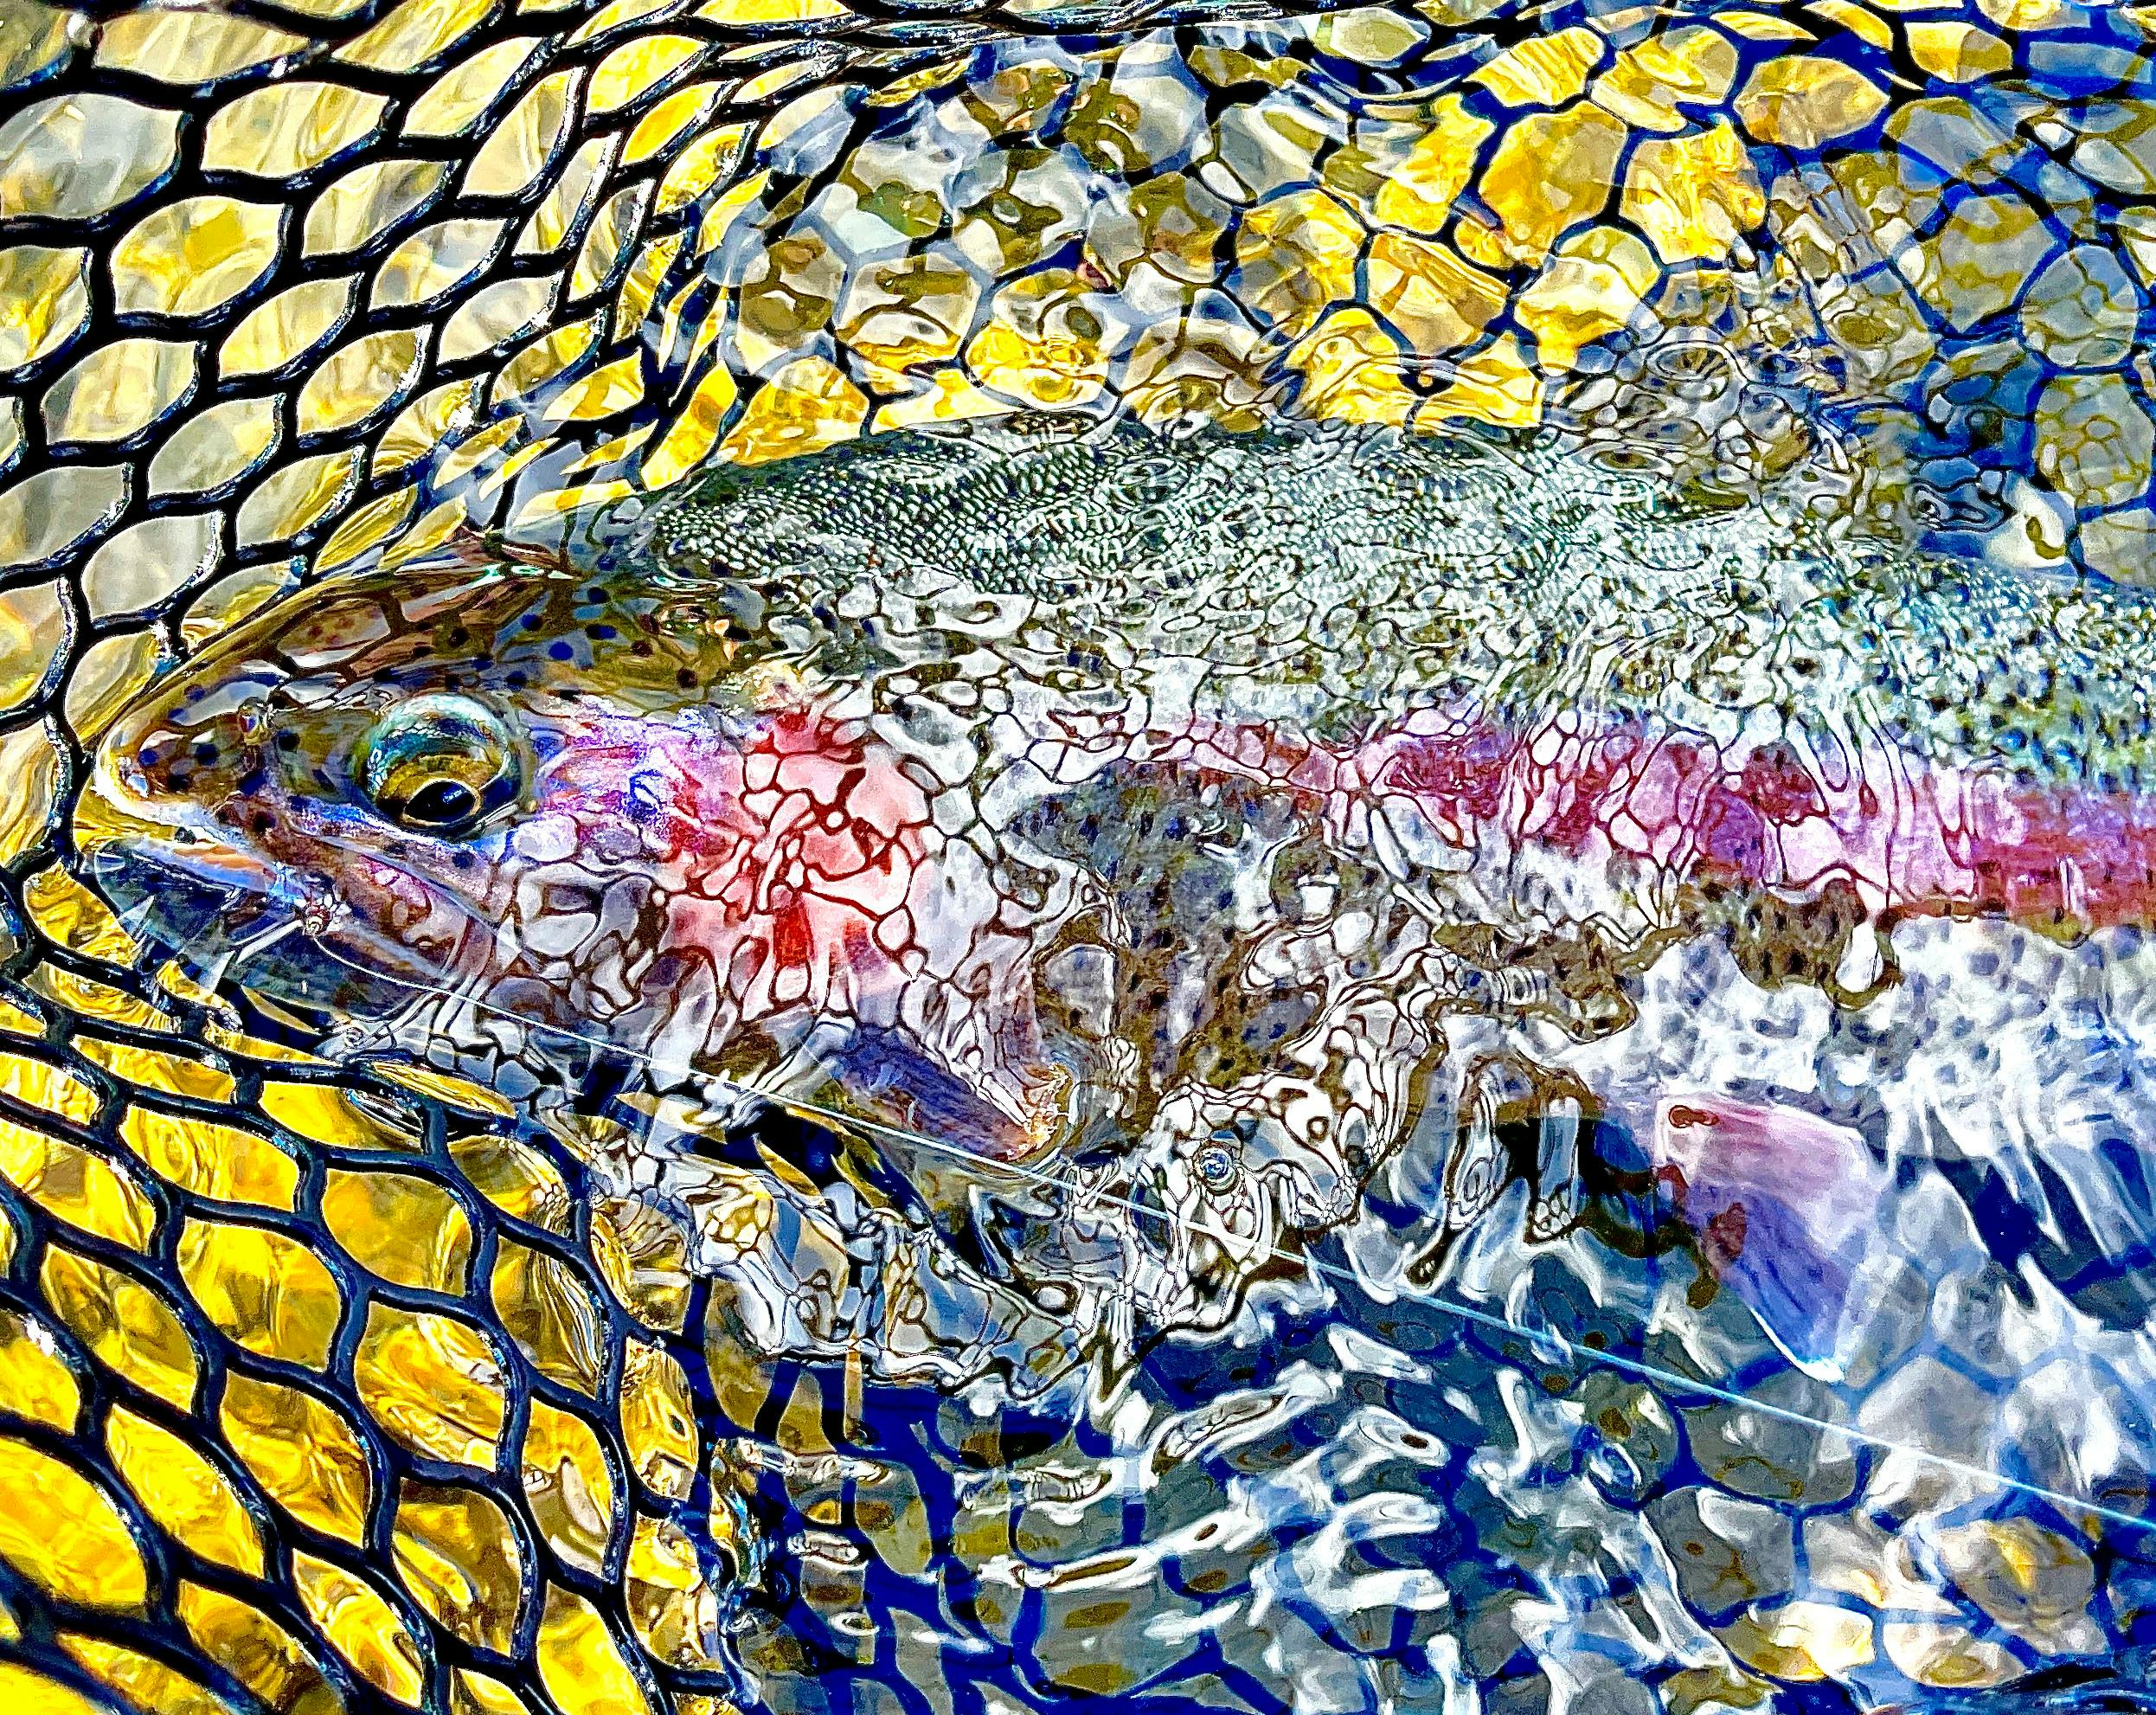 A fish is in a fishing net with a line in its mouth.